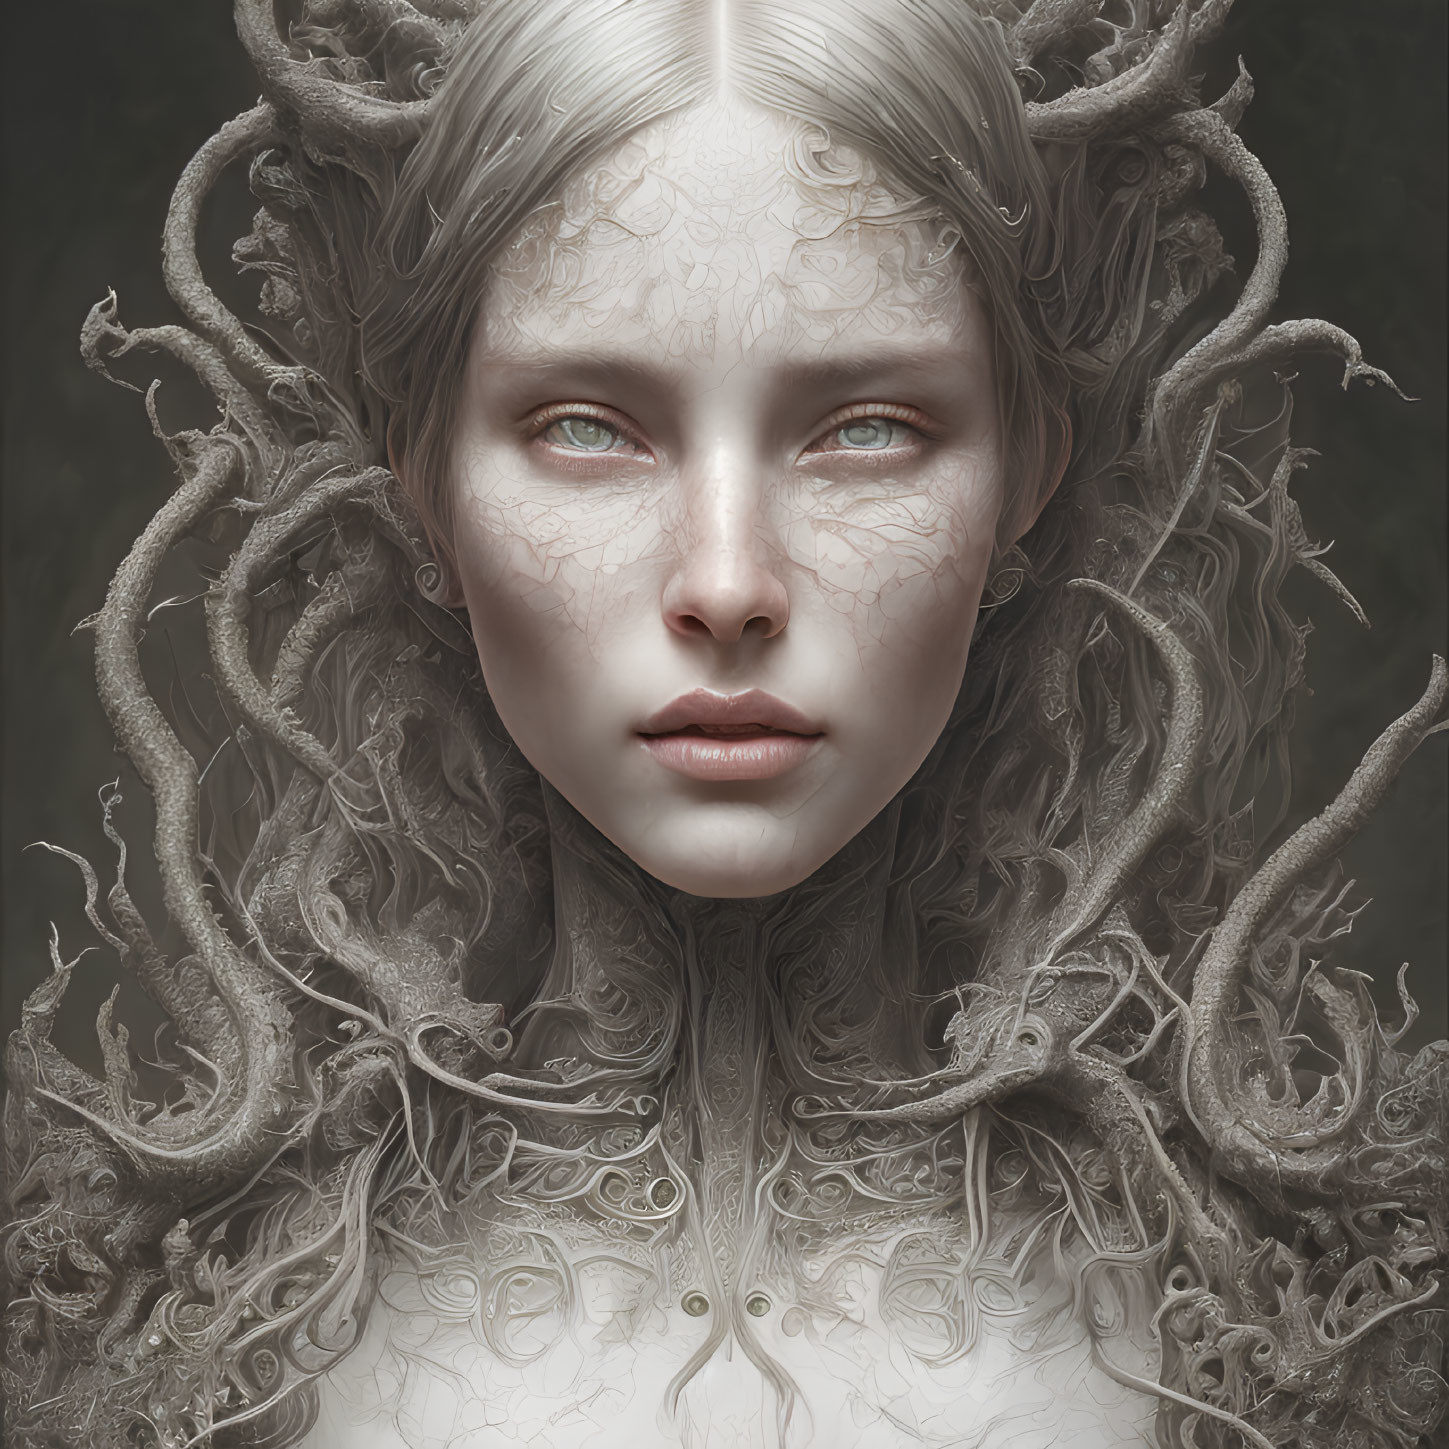 Ethereal woman with intricate skin patterns and snake-like tendrils